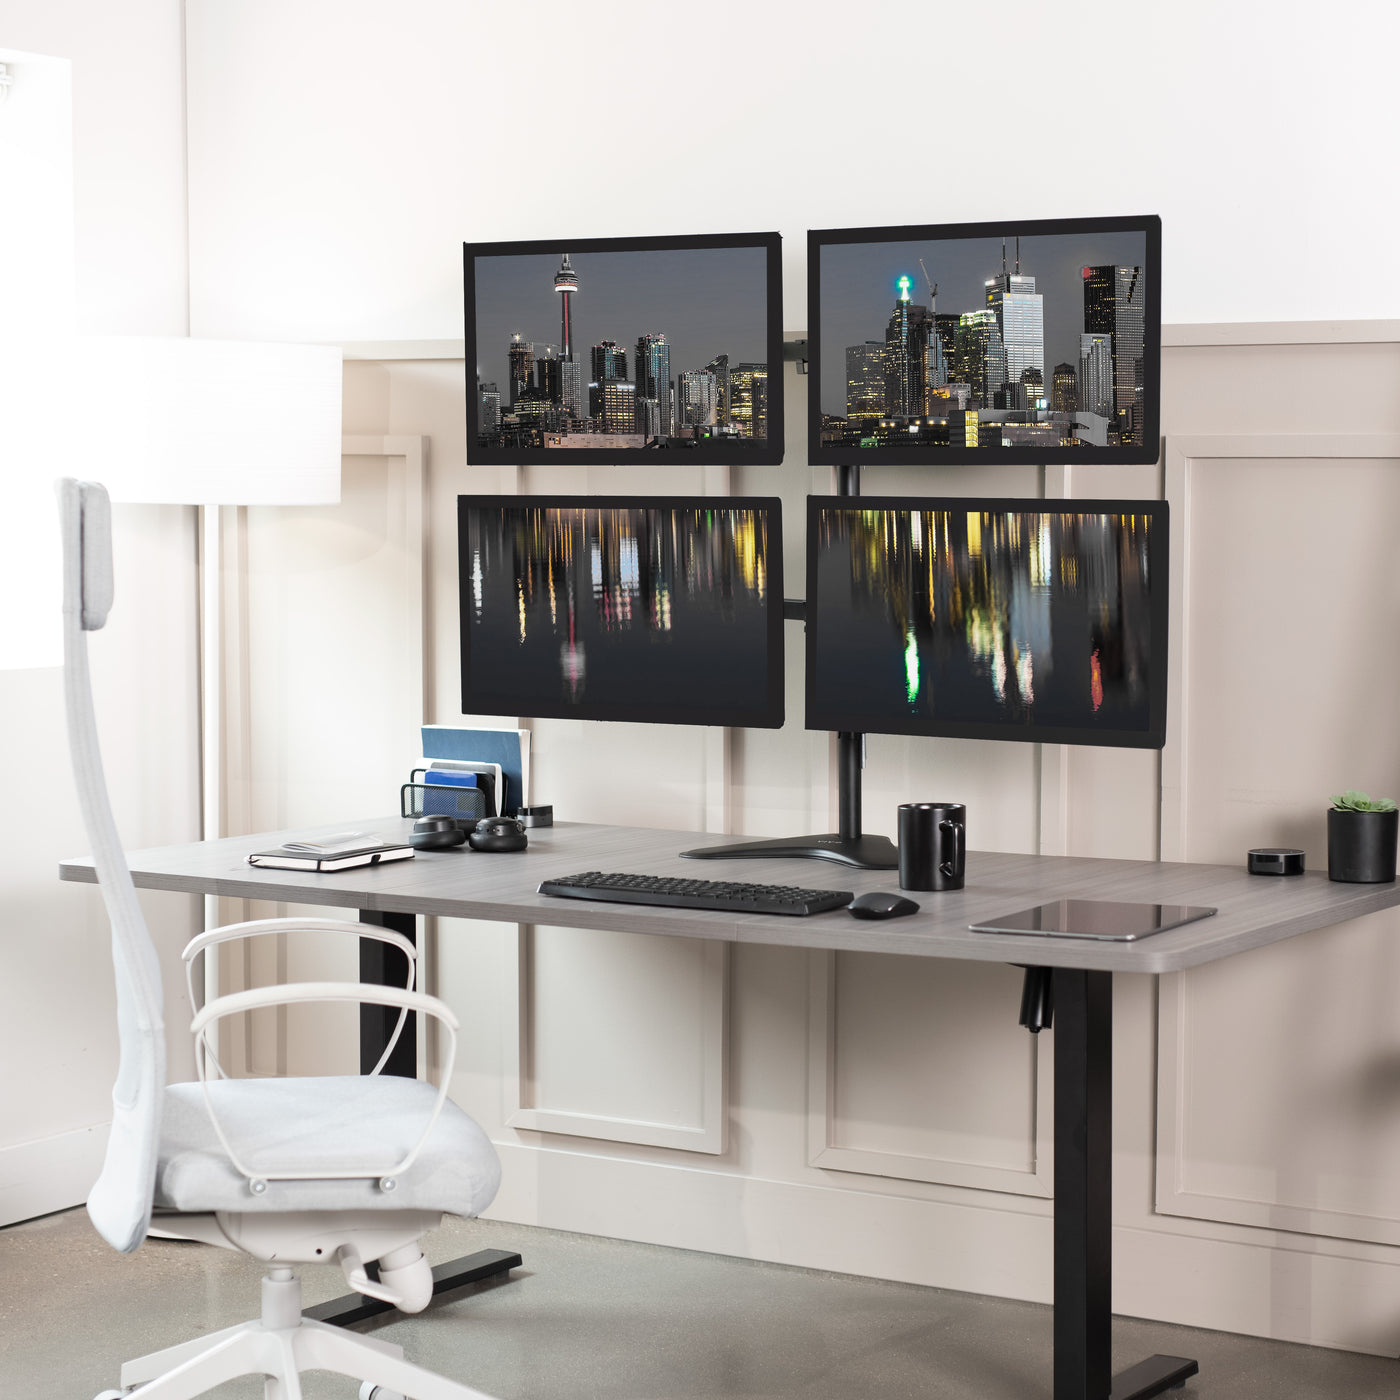 Quad Monitor Desk Stand holds 4 screens for work efficiency at your office desk. Features a freestanding base.